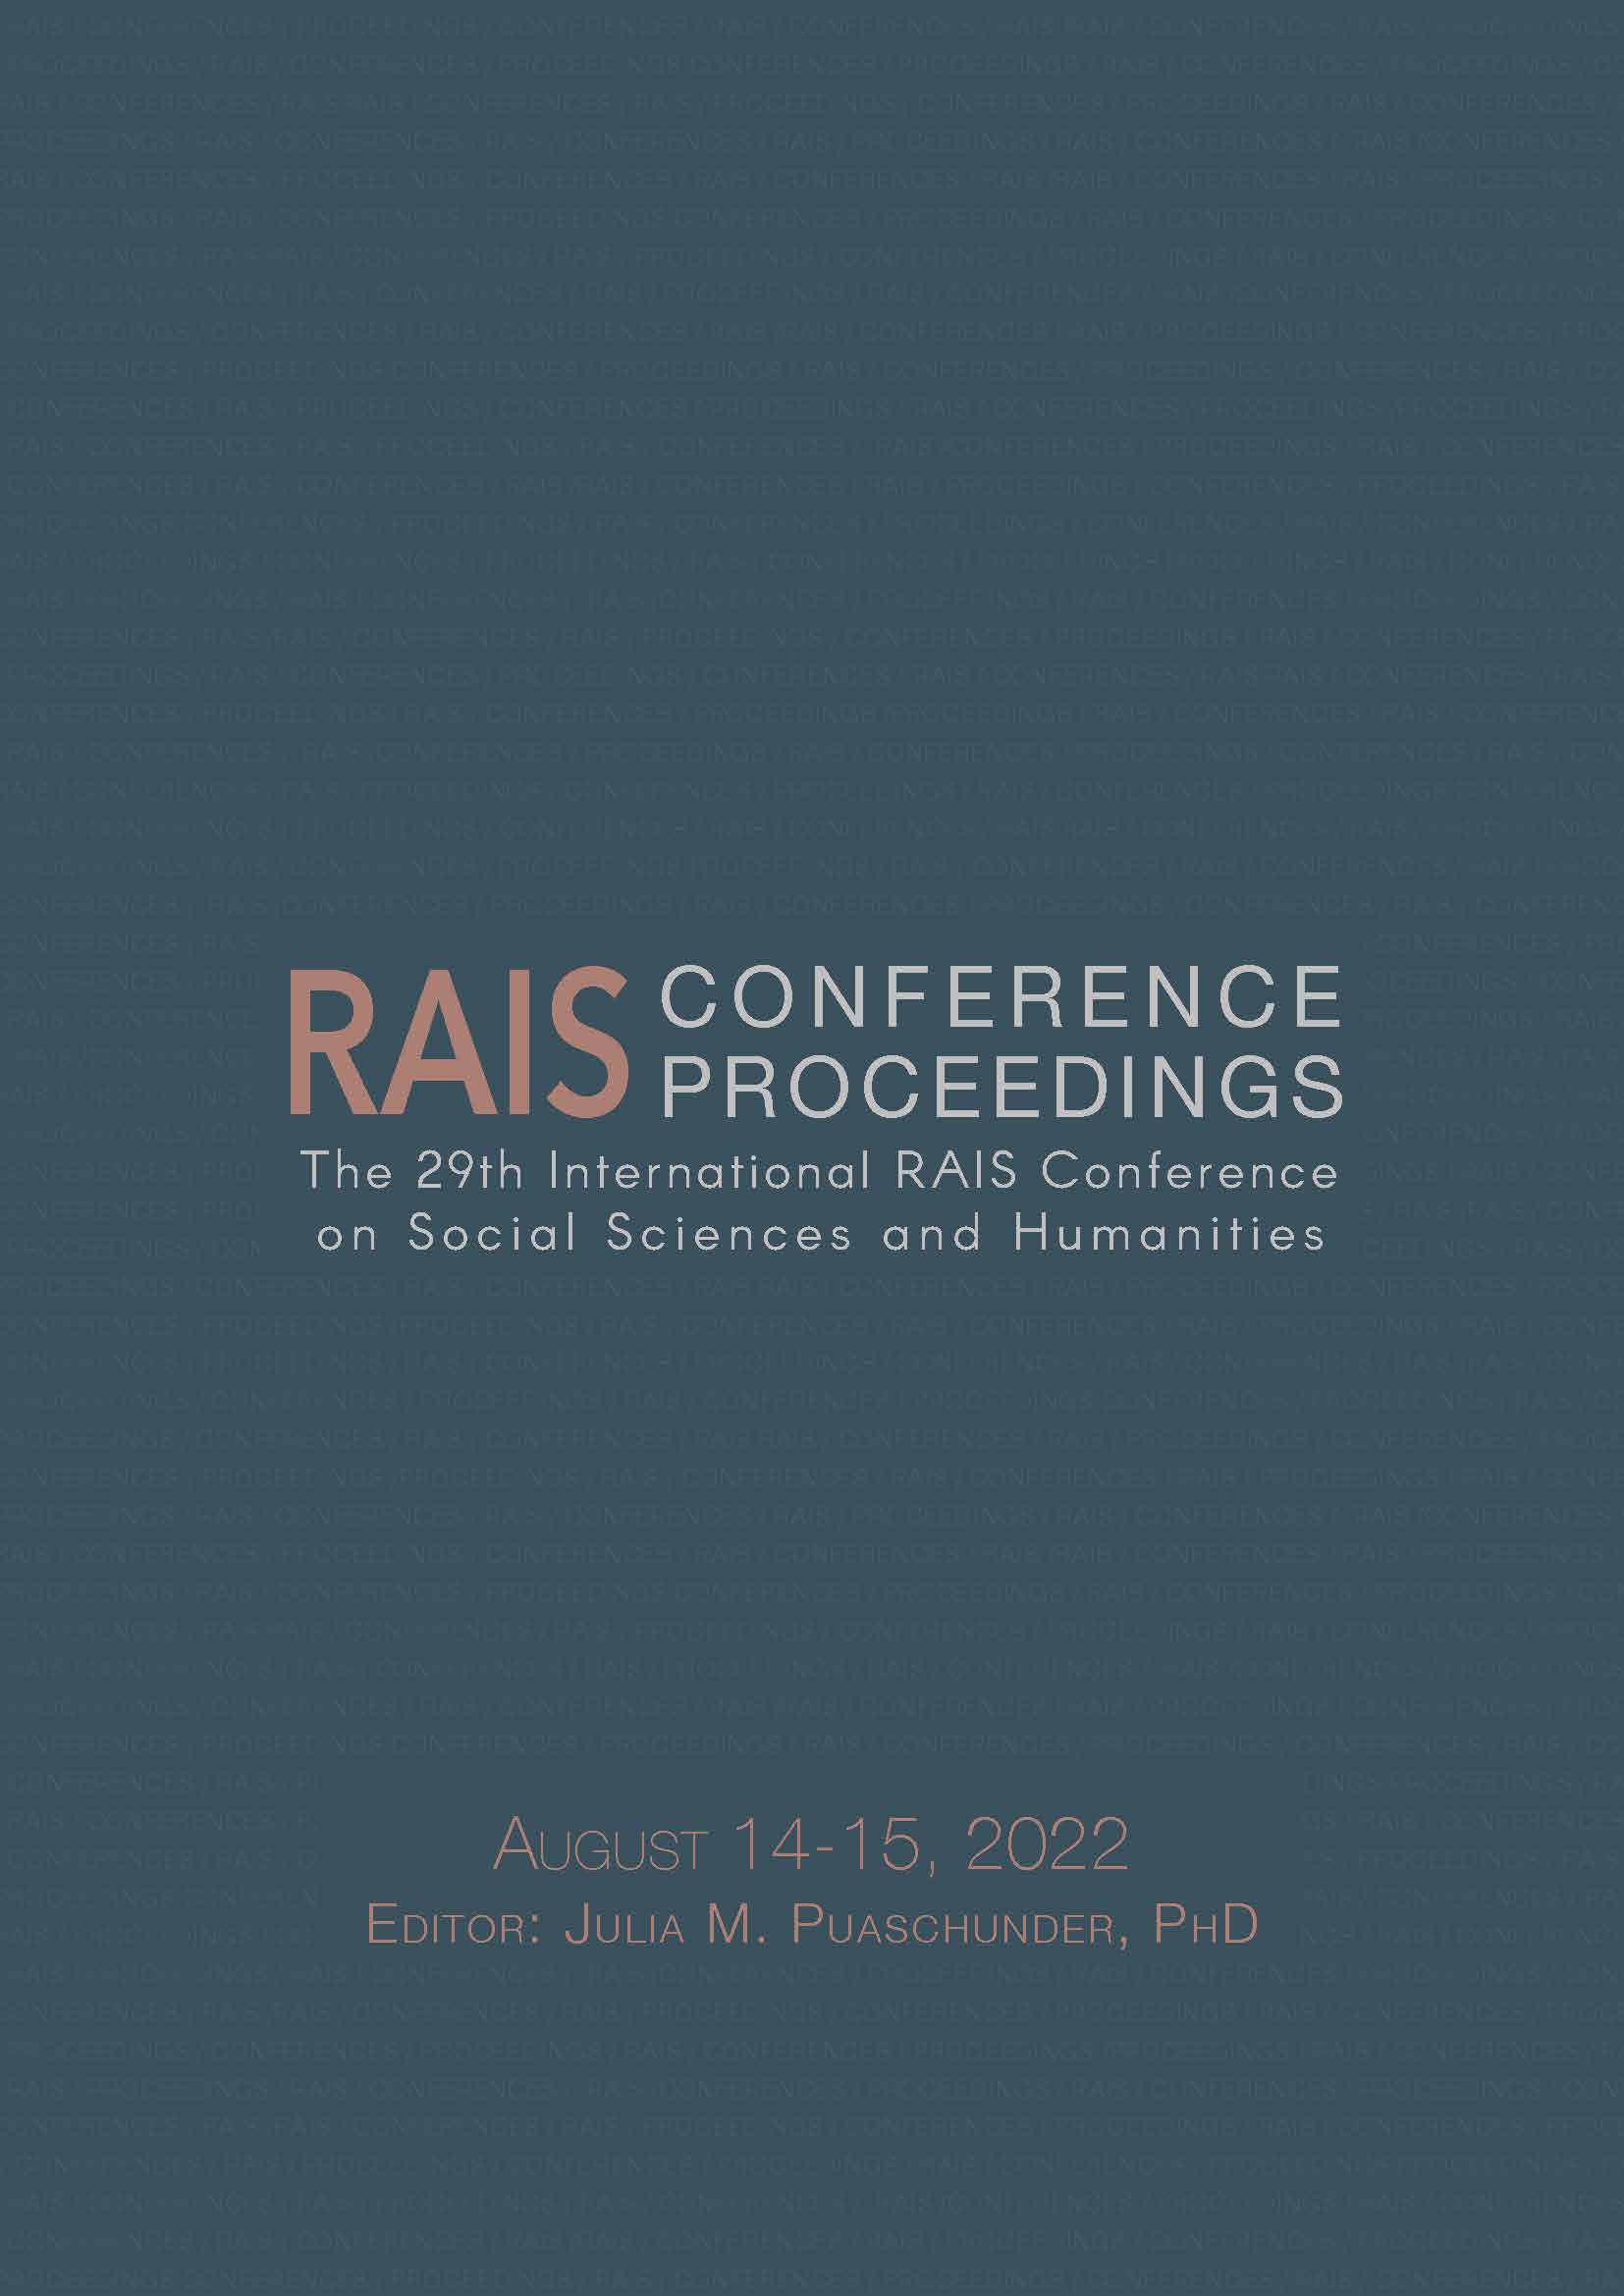 Proceedings of the 29th International RAIS Conference on Social Sciences and Humanities